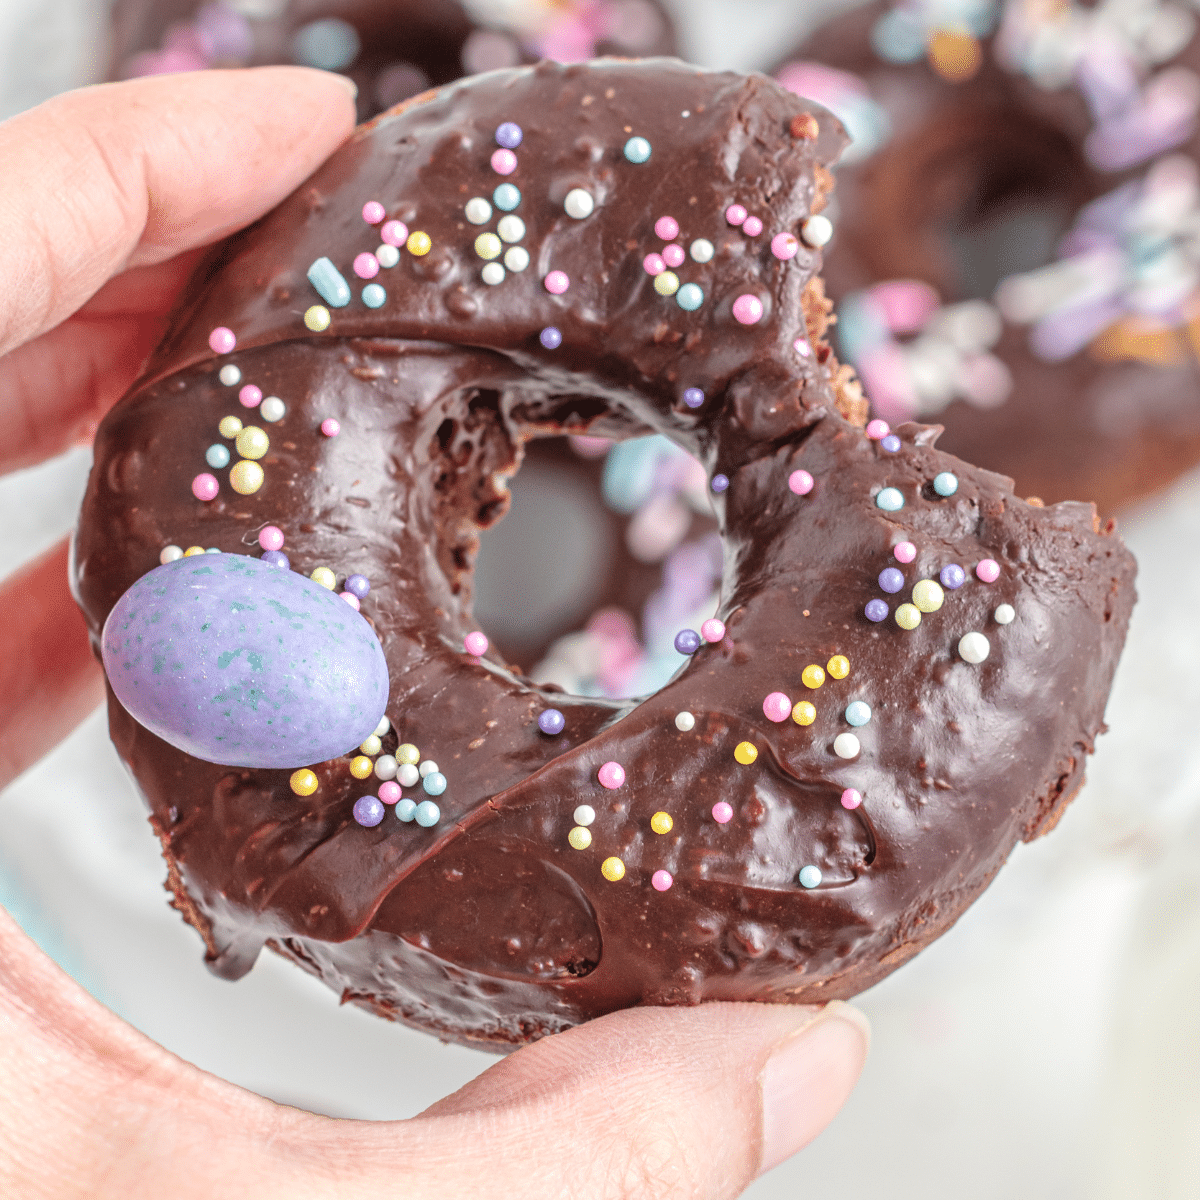 one baked double chocolate frosted donut with a candy egg and multicolored sprinkles and a bite out of it